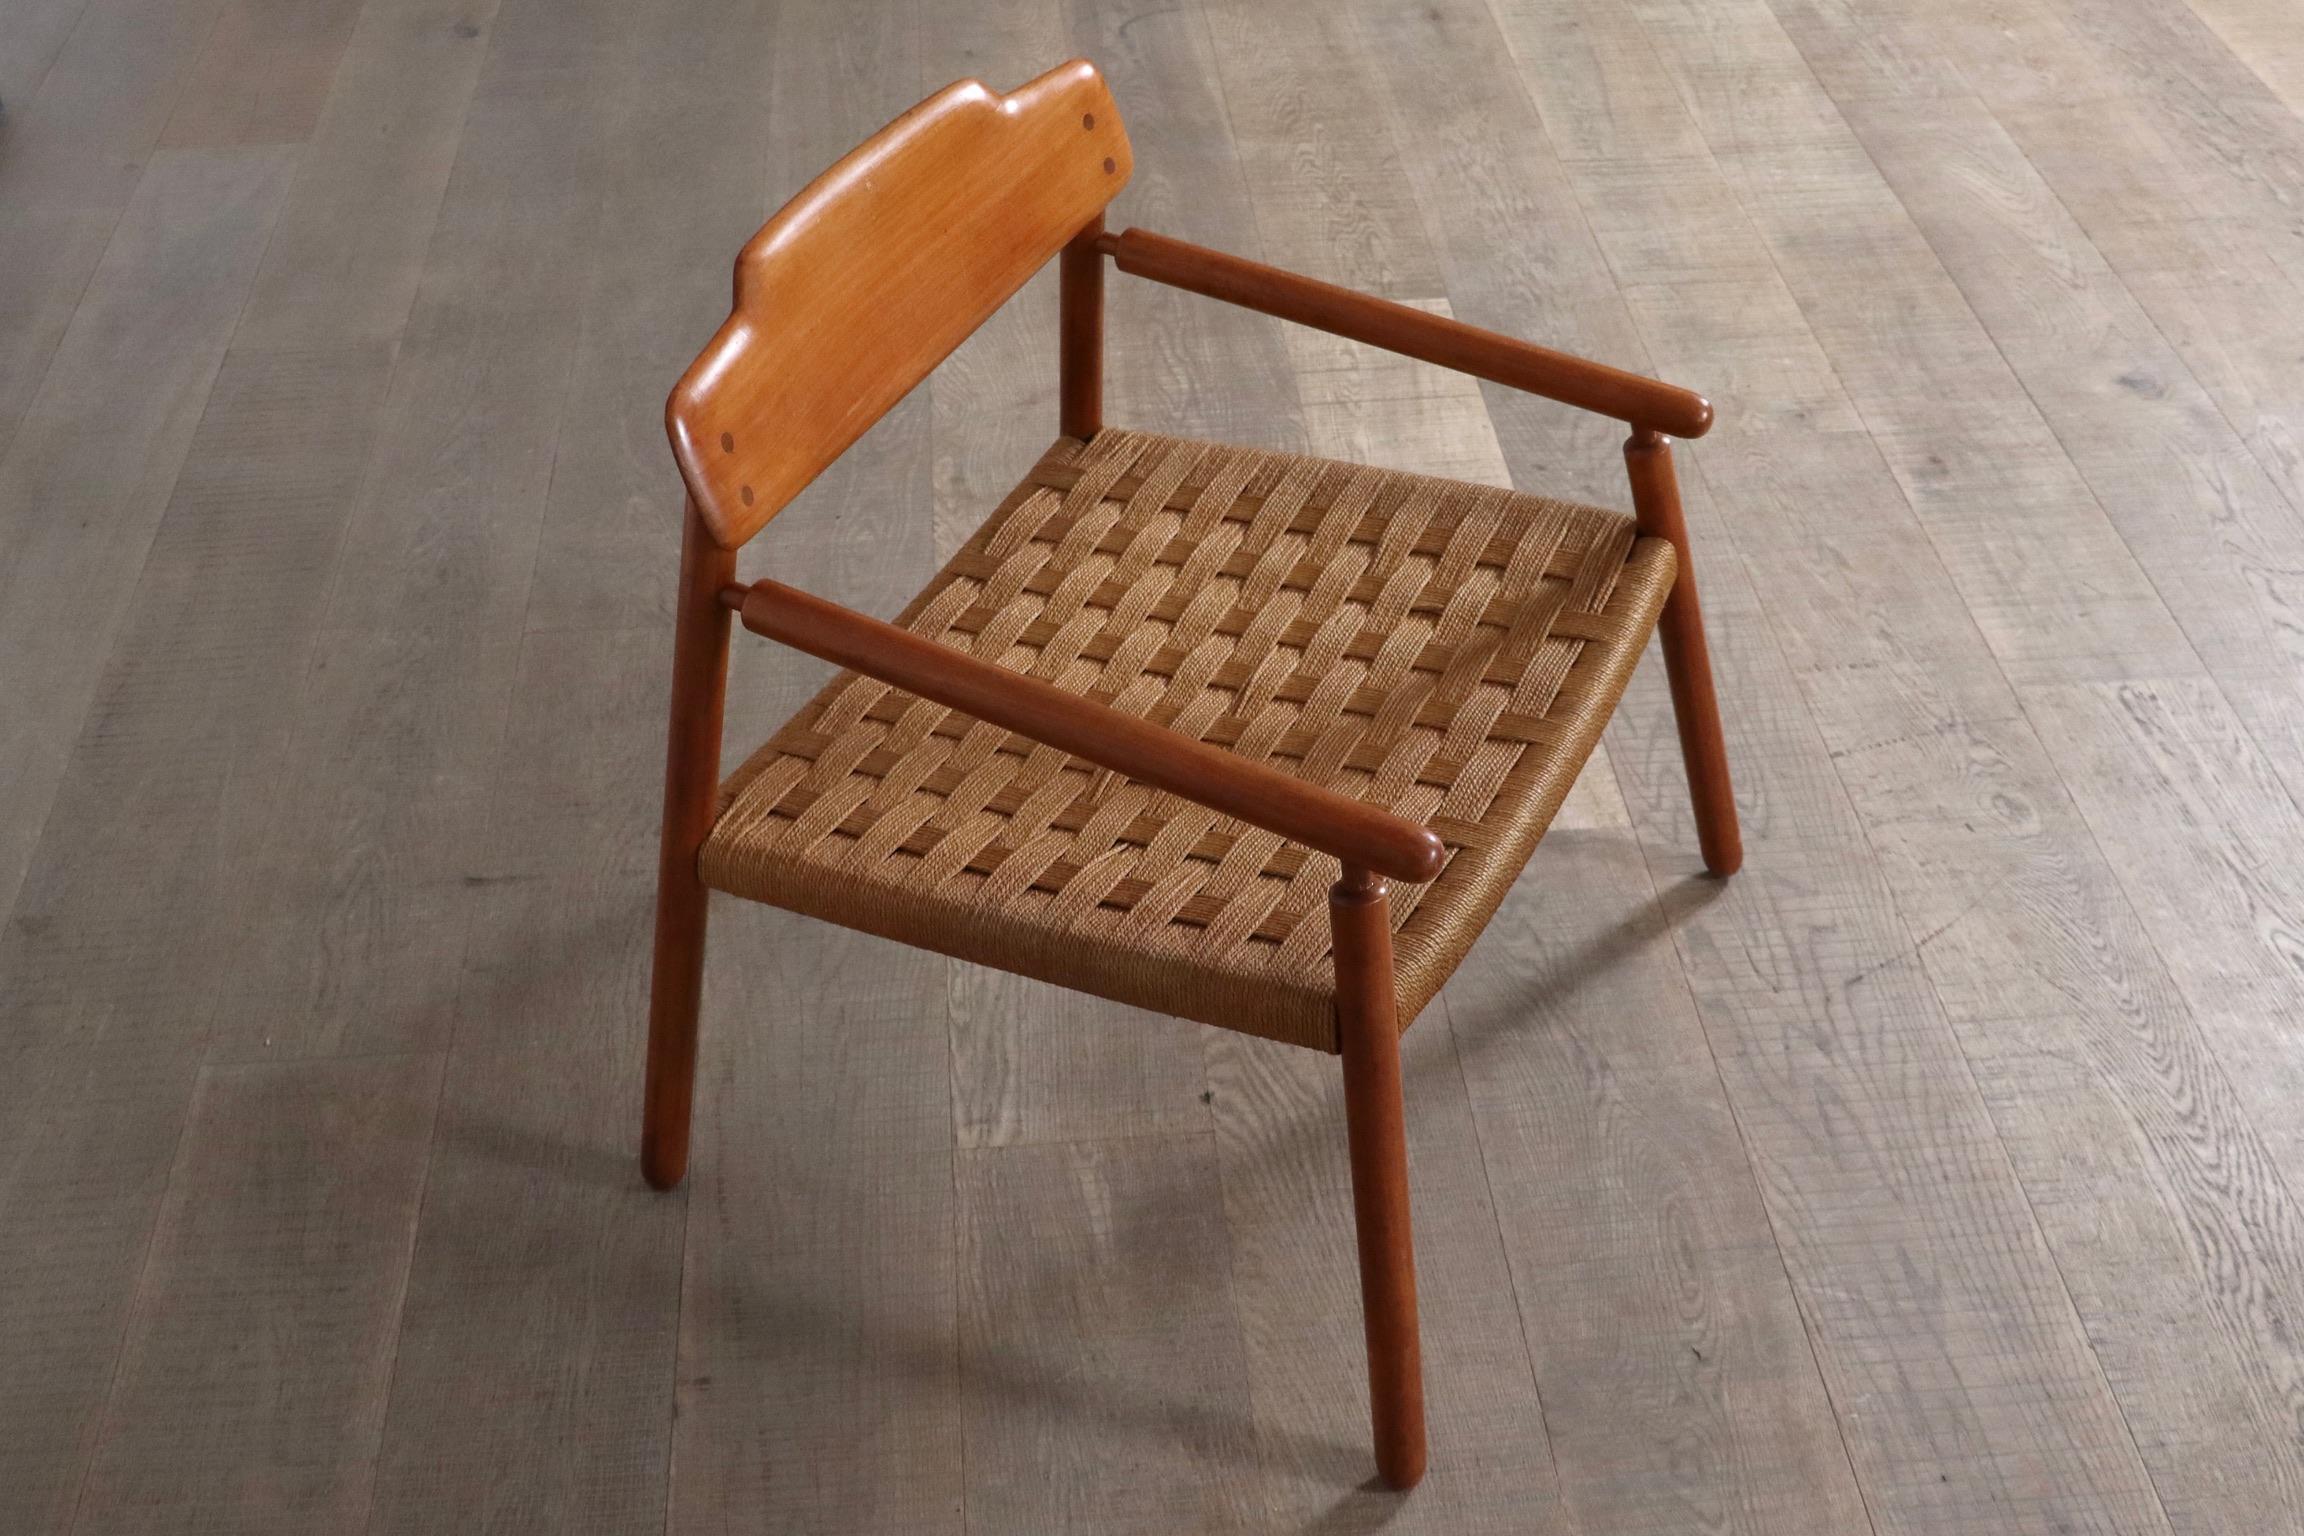 Midcentury Minimalistic Easy Chair In Oak And Papercord, Finland 1950s For Sale 6